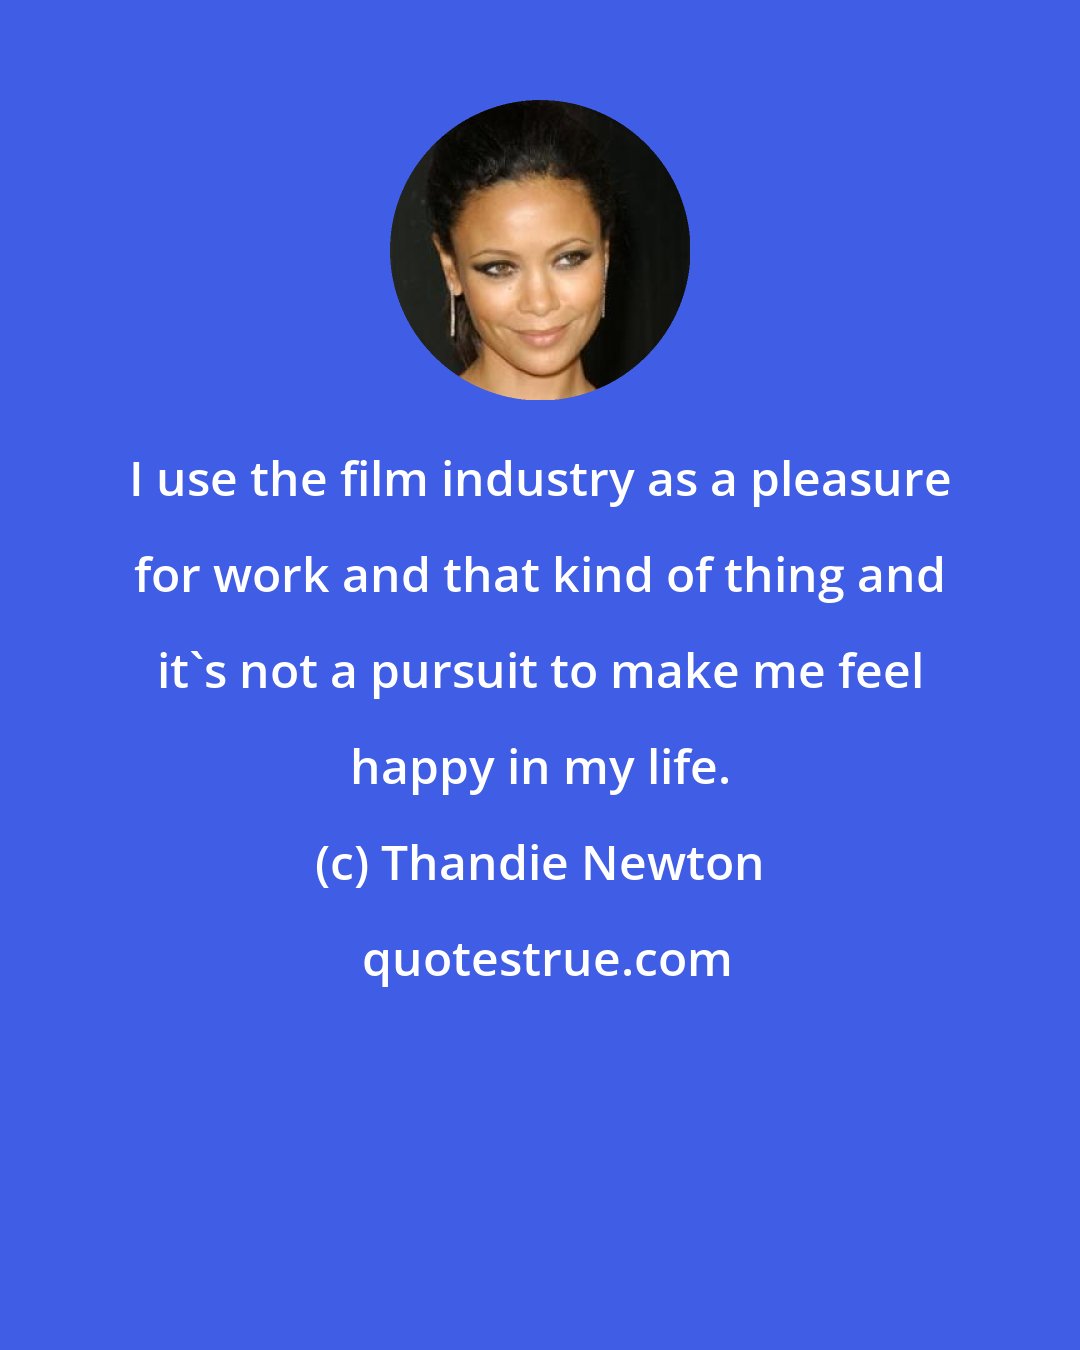 Thandie Newton: I use the film industry as a pleasure for work and that kind of thing and it's not a pursuit to make me feel happy in my life.